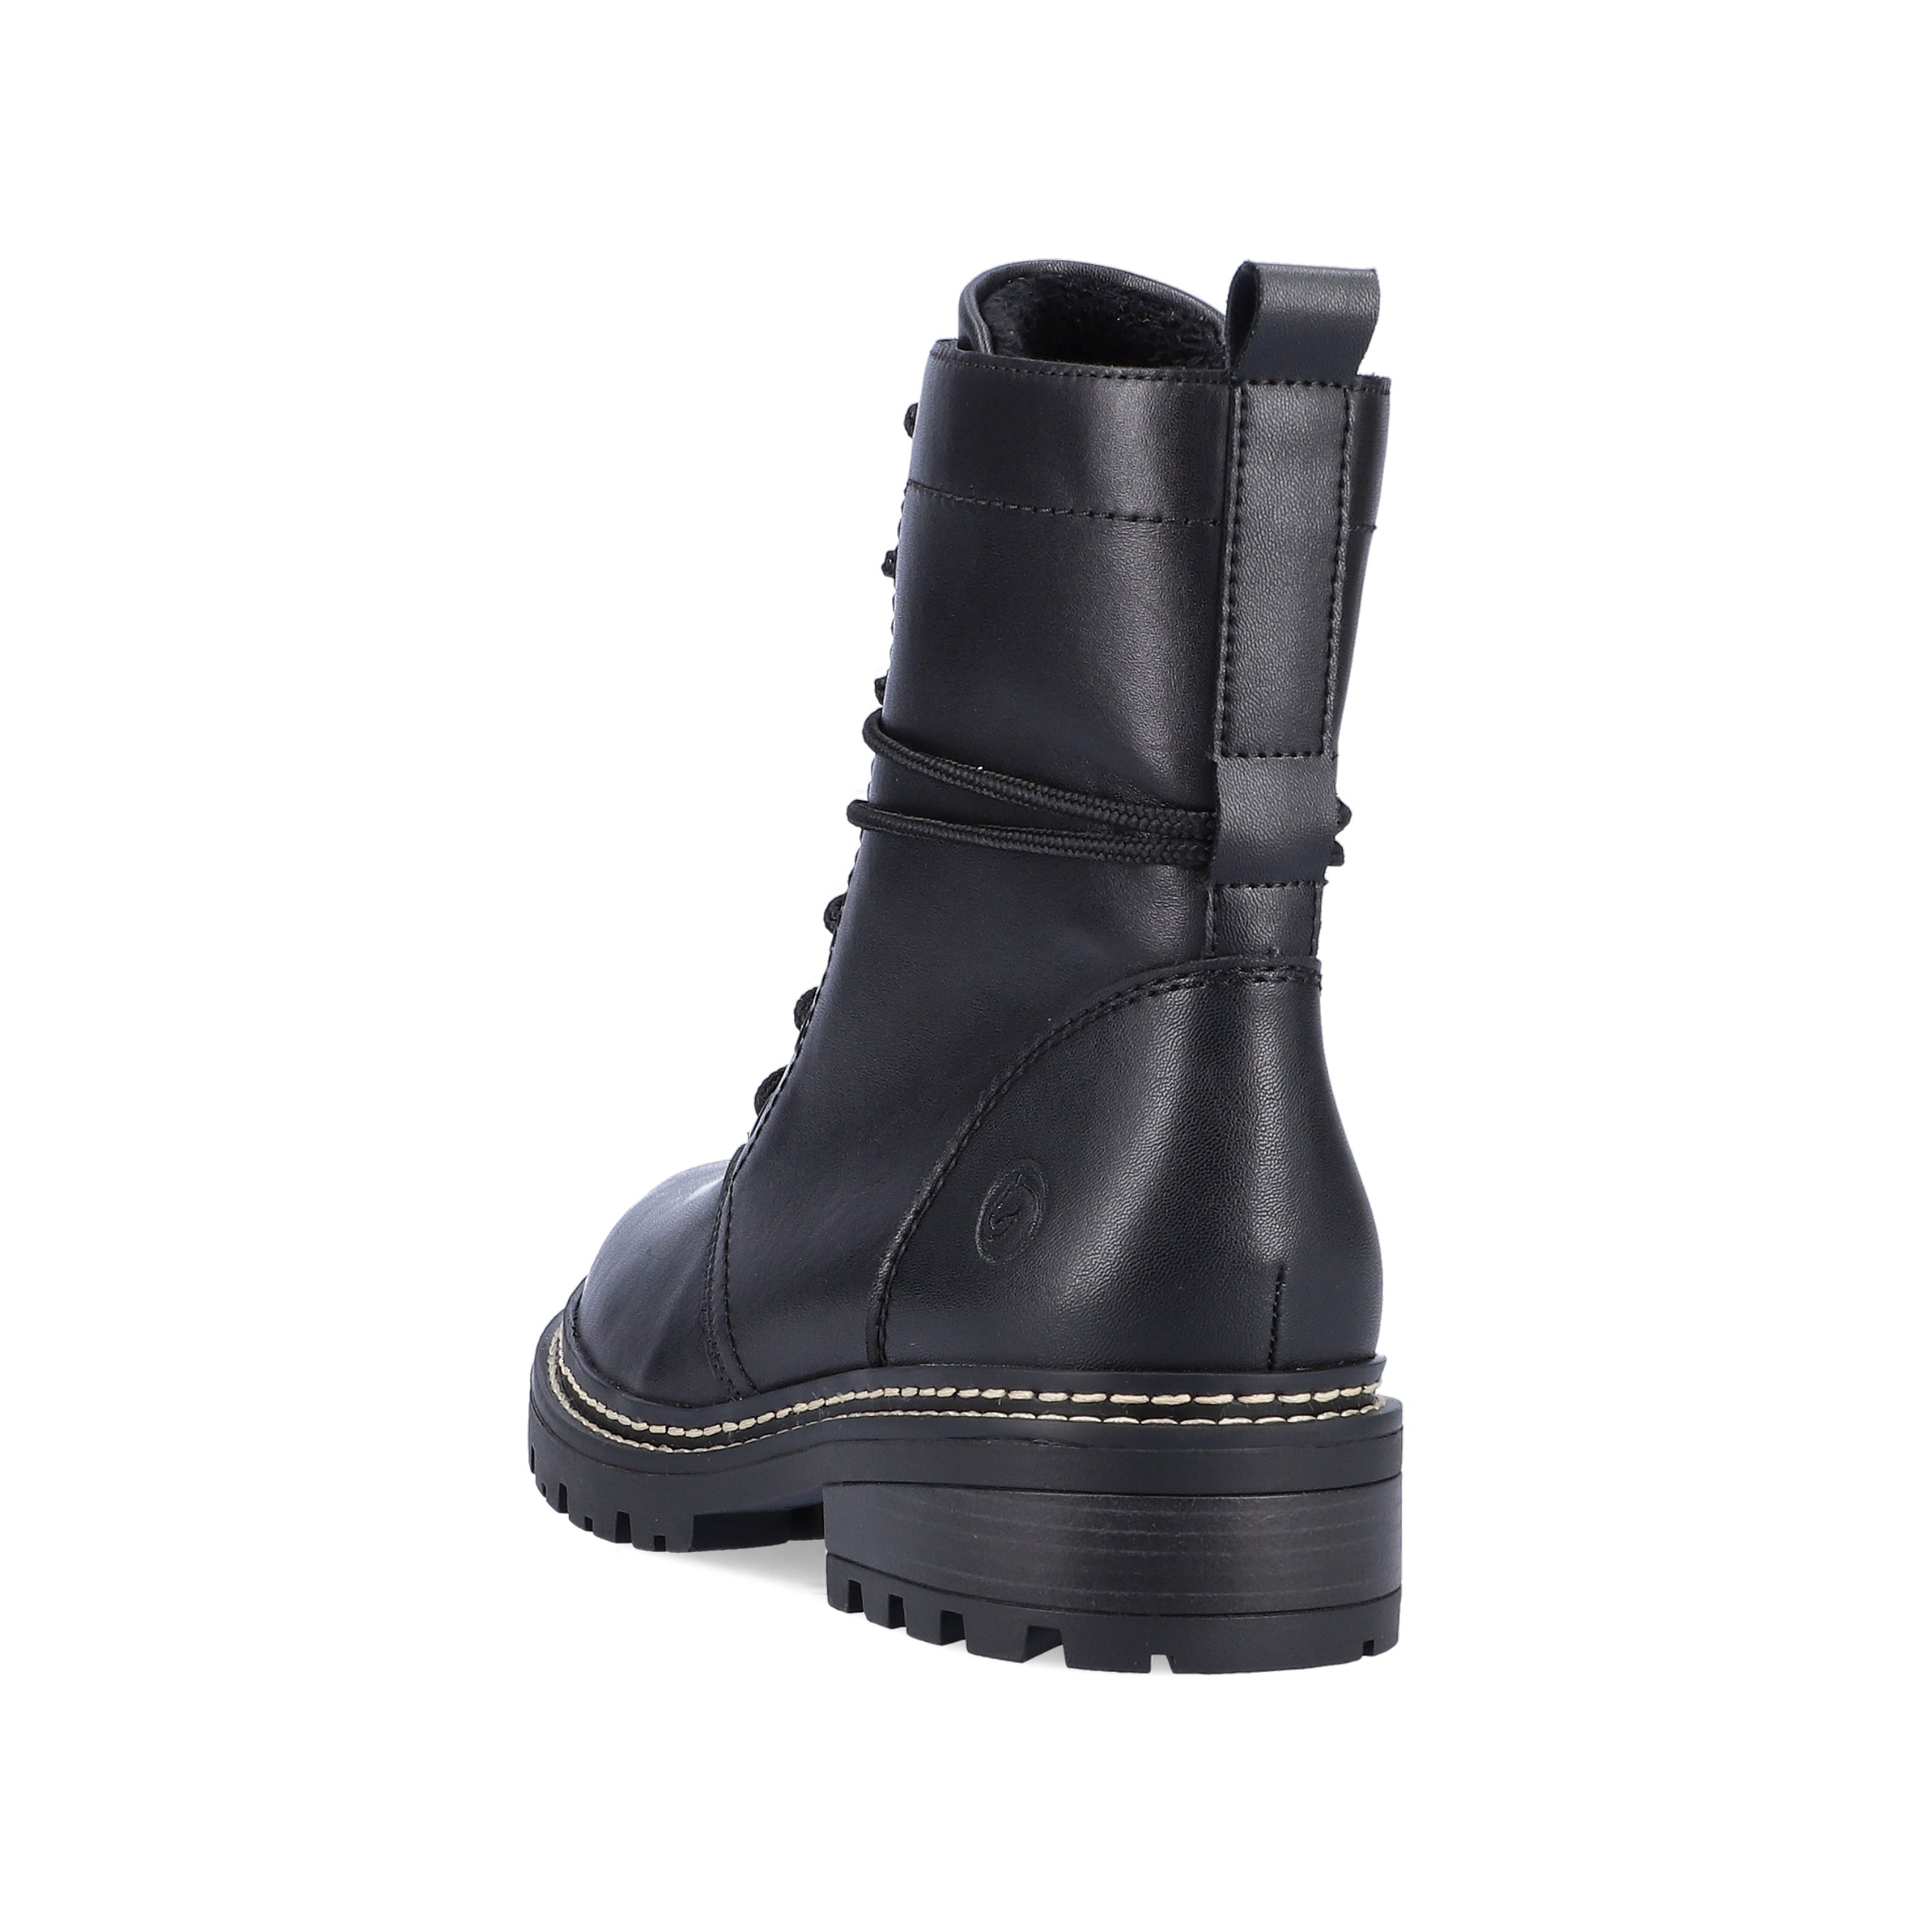 Night black remonte women´s biker boots D0B75-01 with cushioning profile sole. Shoe from the back